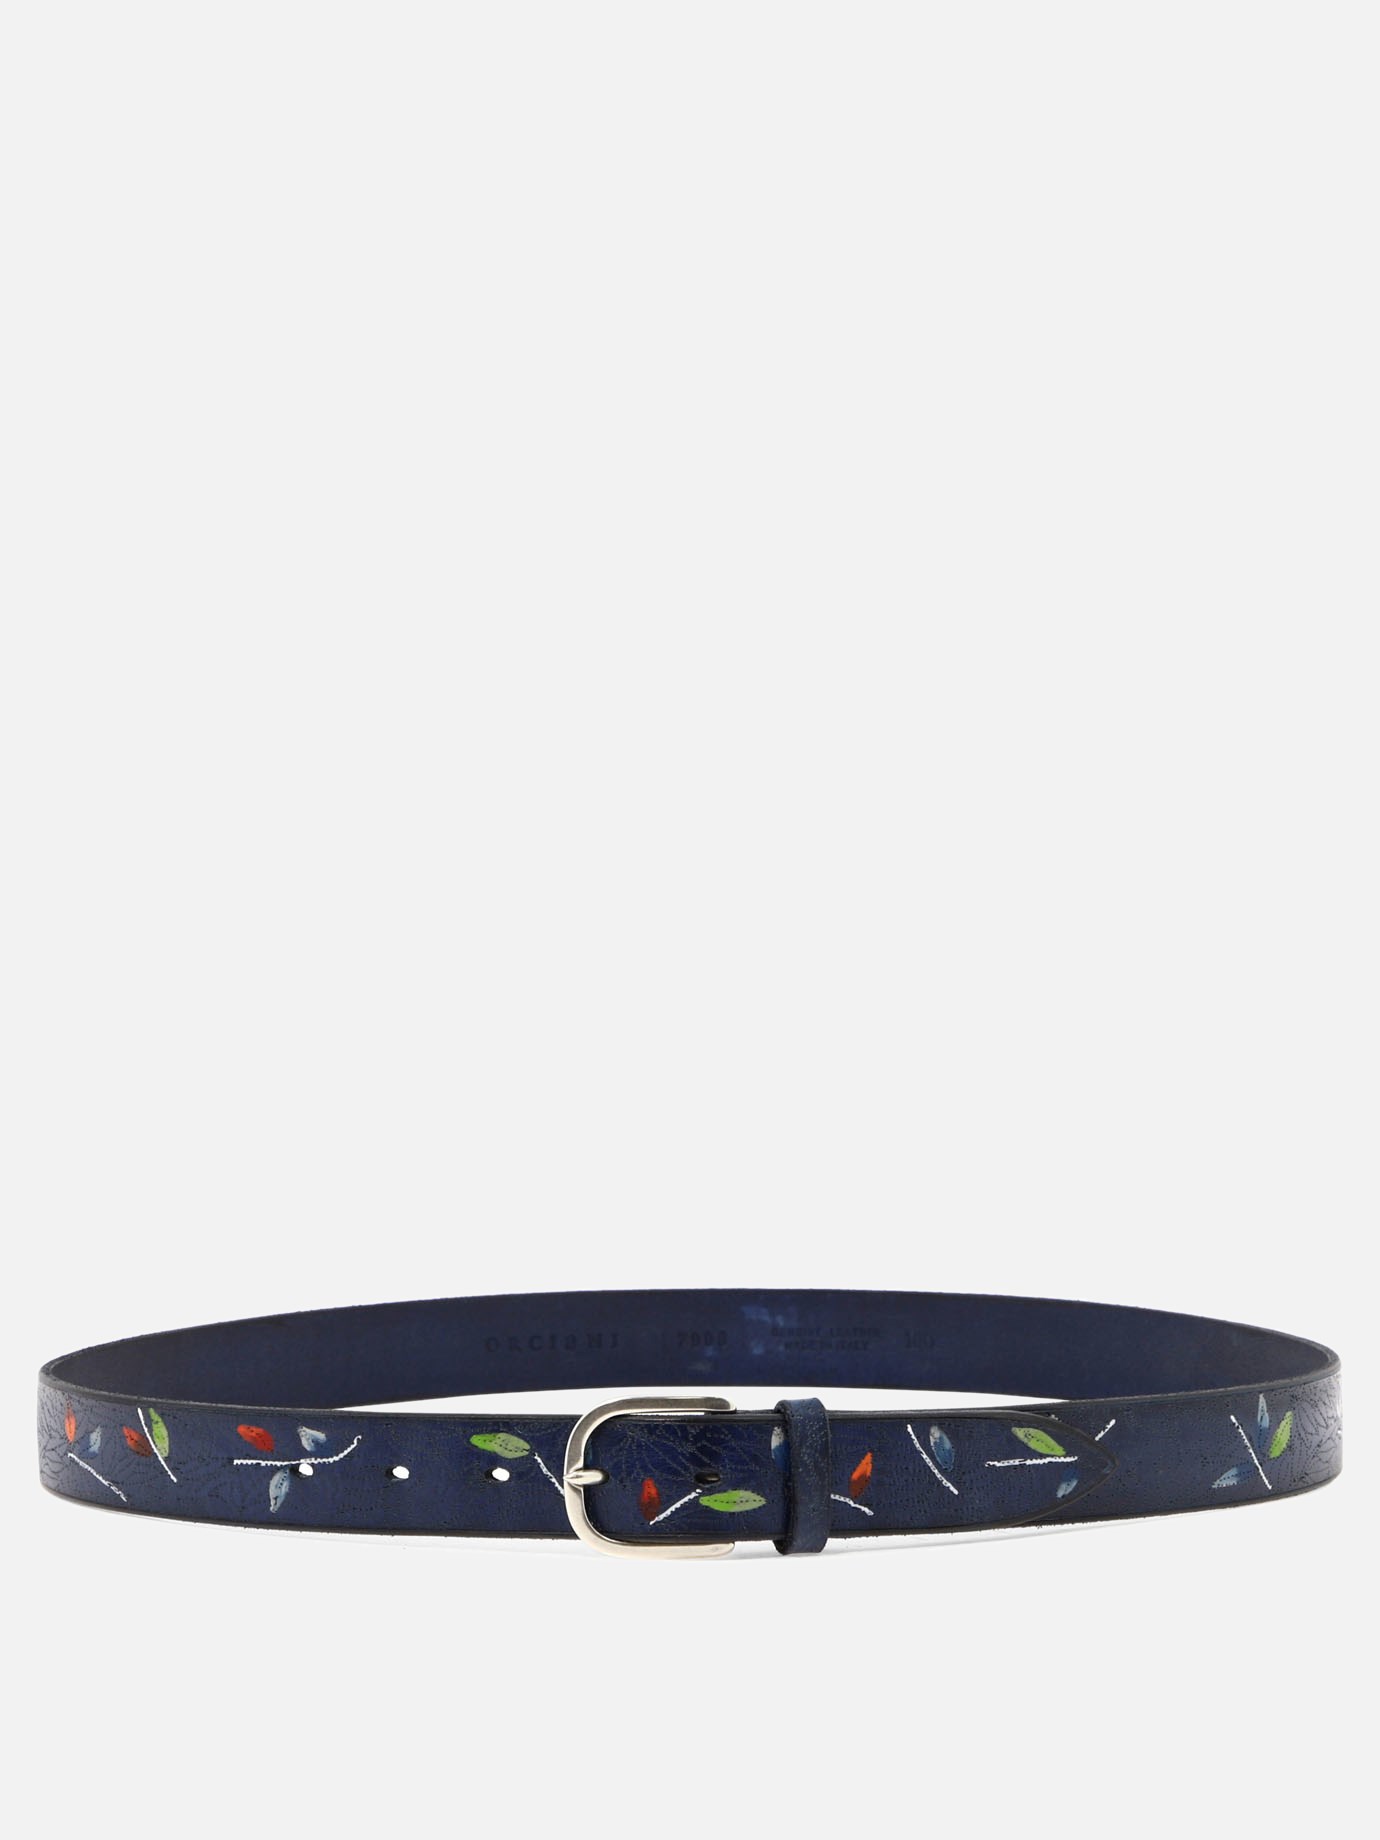  Bamboo  beltby Orciani - 2